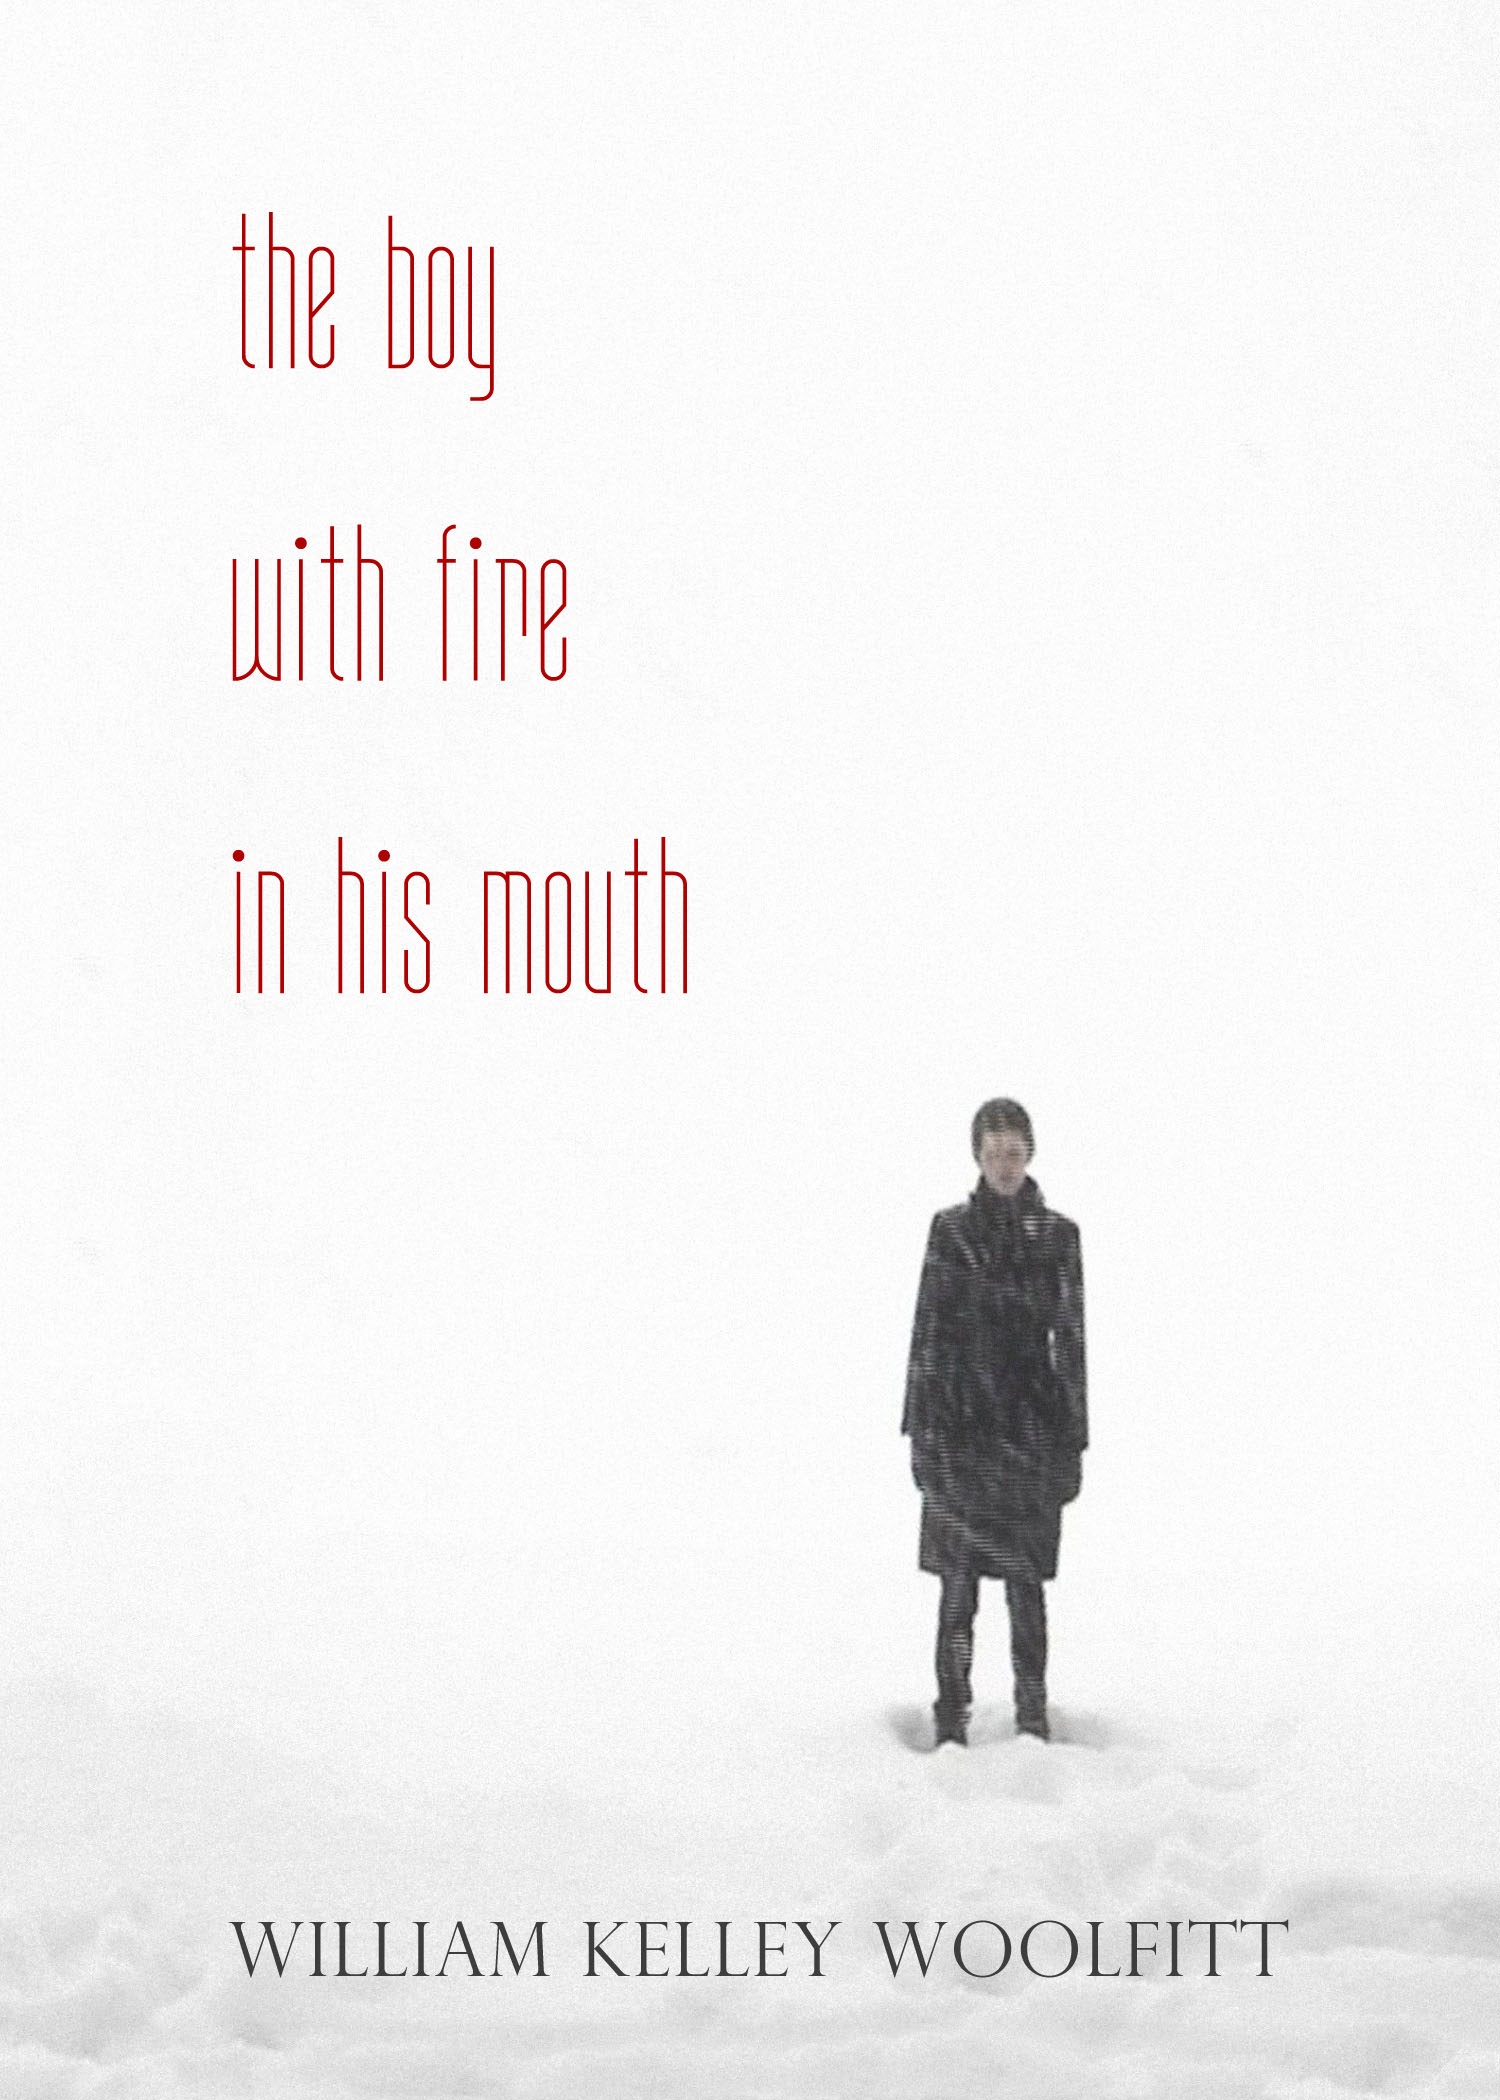  The Boy with Fire in His Mouth (Epiphany Editions) 2014.  Order here . 